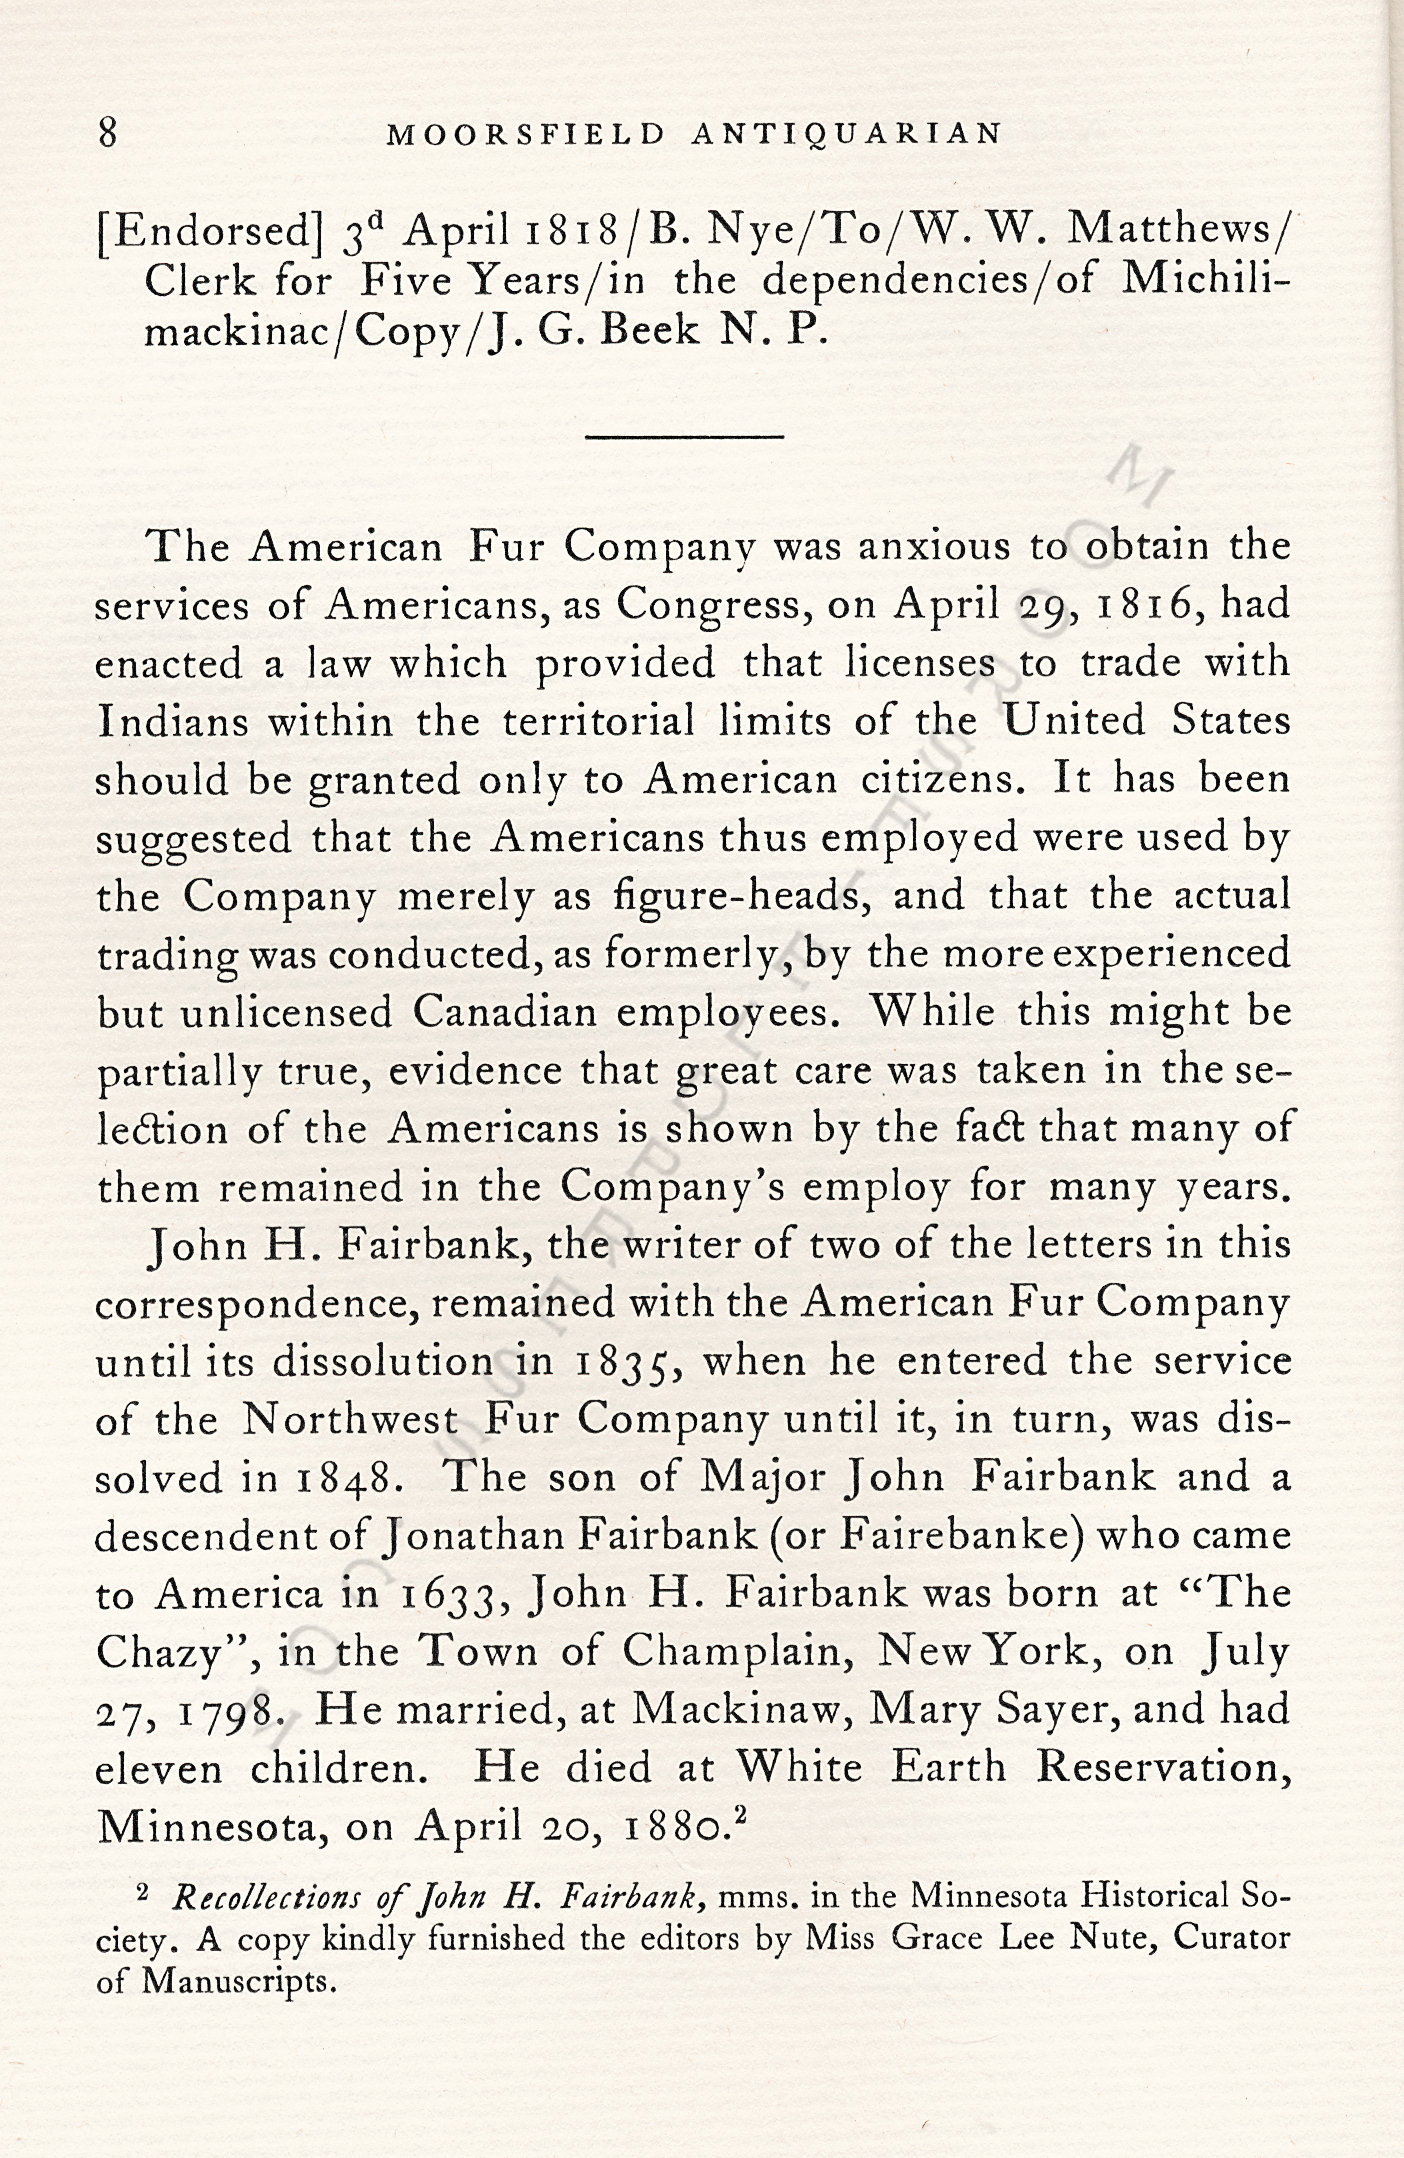 With the
                      American Fur Company in the Michilimackinac
                      Dependencies 1818-1822